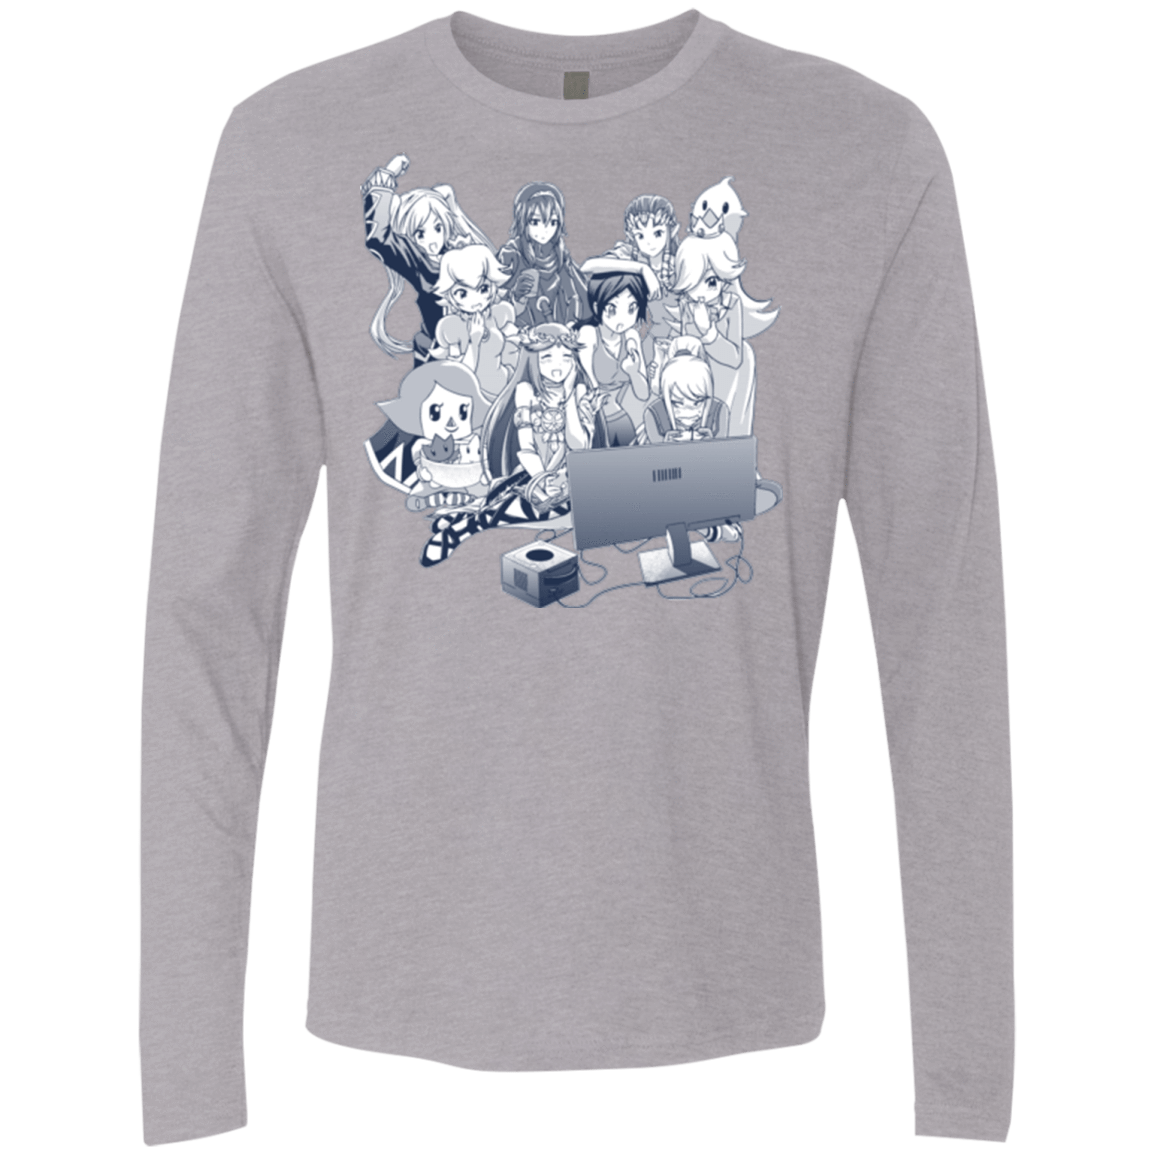 T-Shirts Heather Grey / Small Girls Night Out Men's Premium Long Sleeve